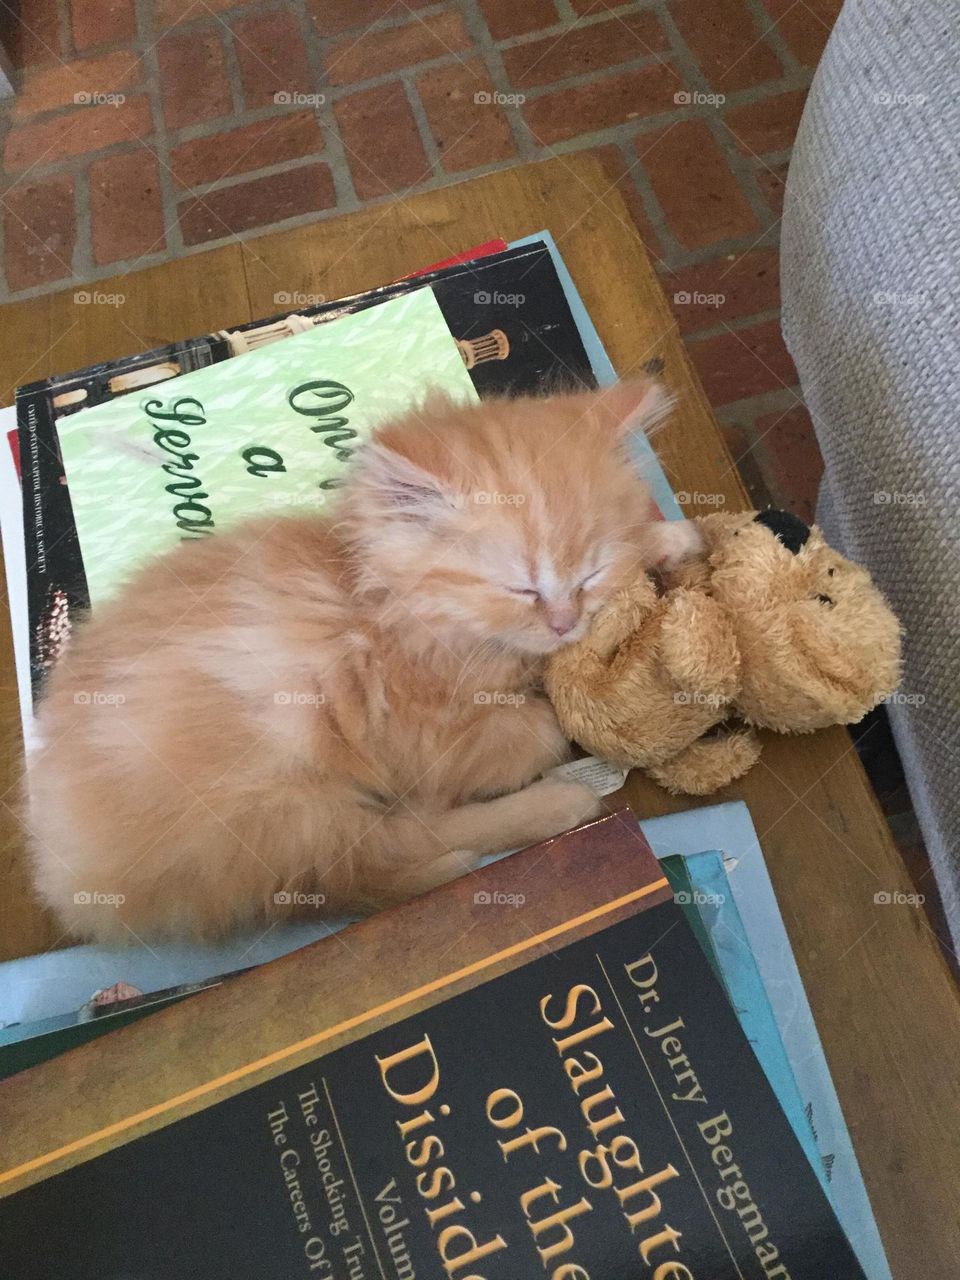 Snuggling with a stuffy. 